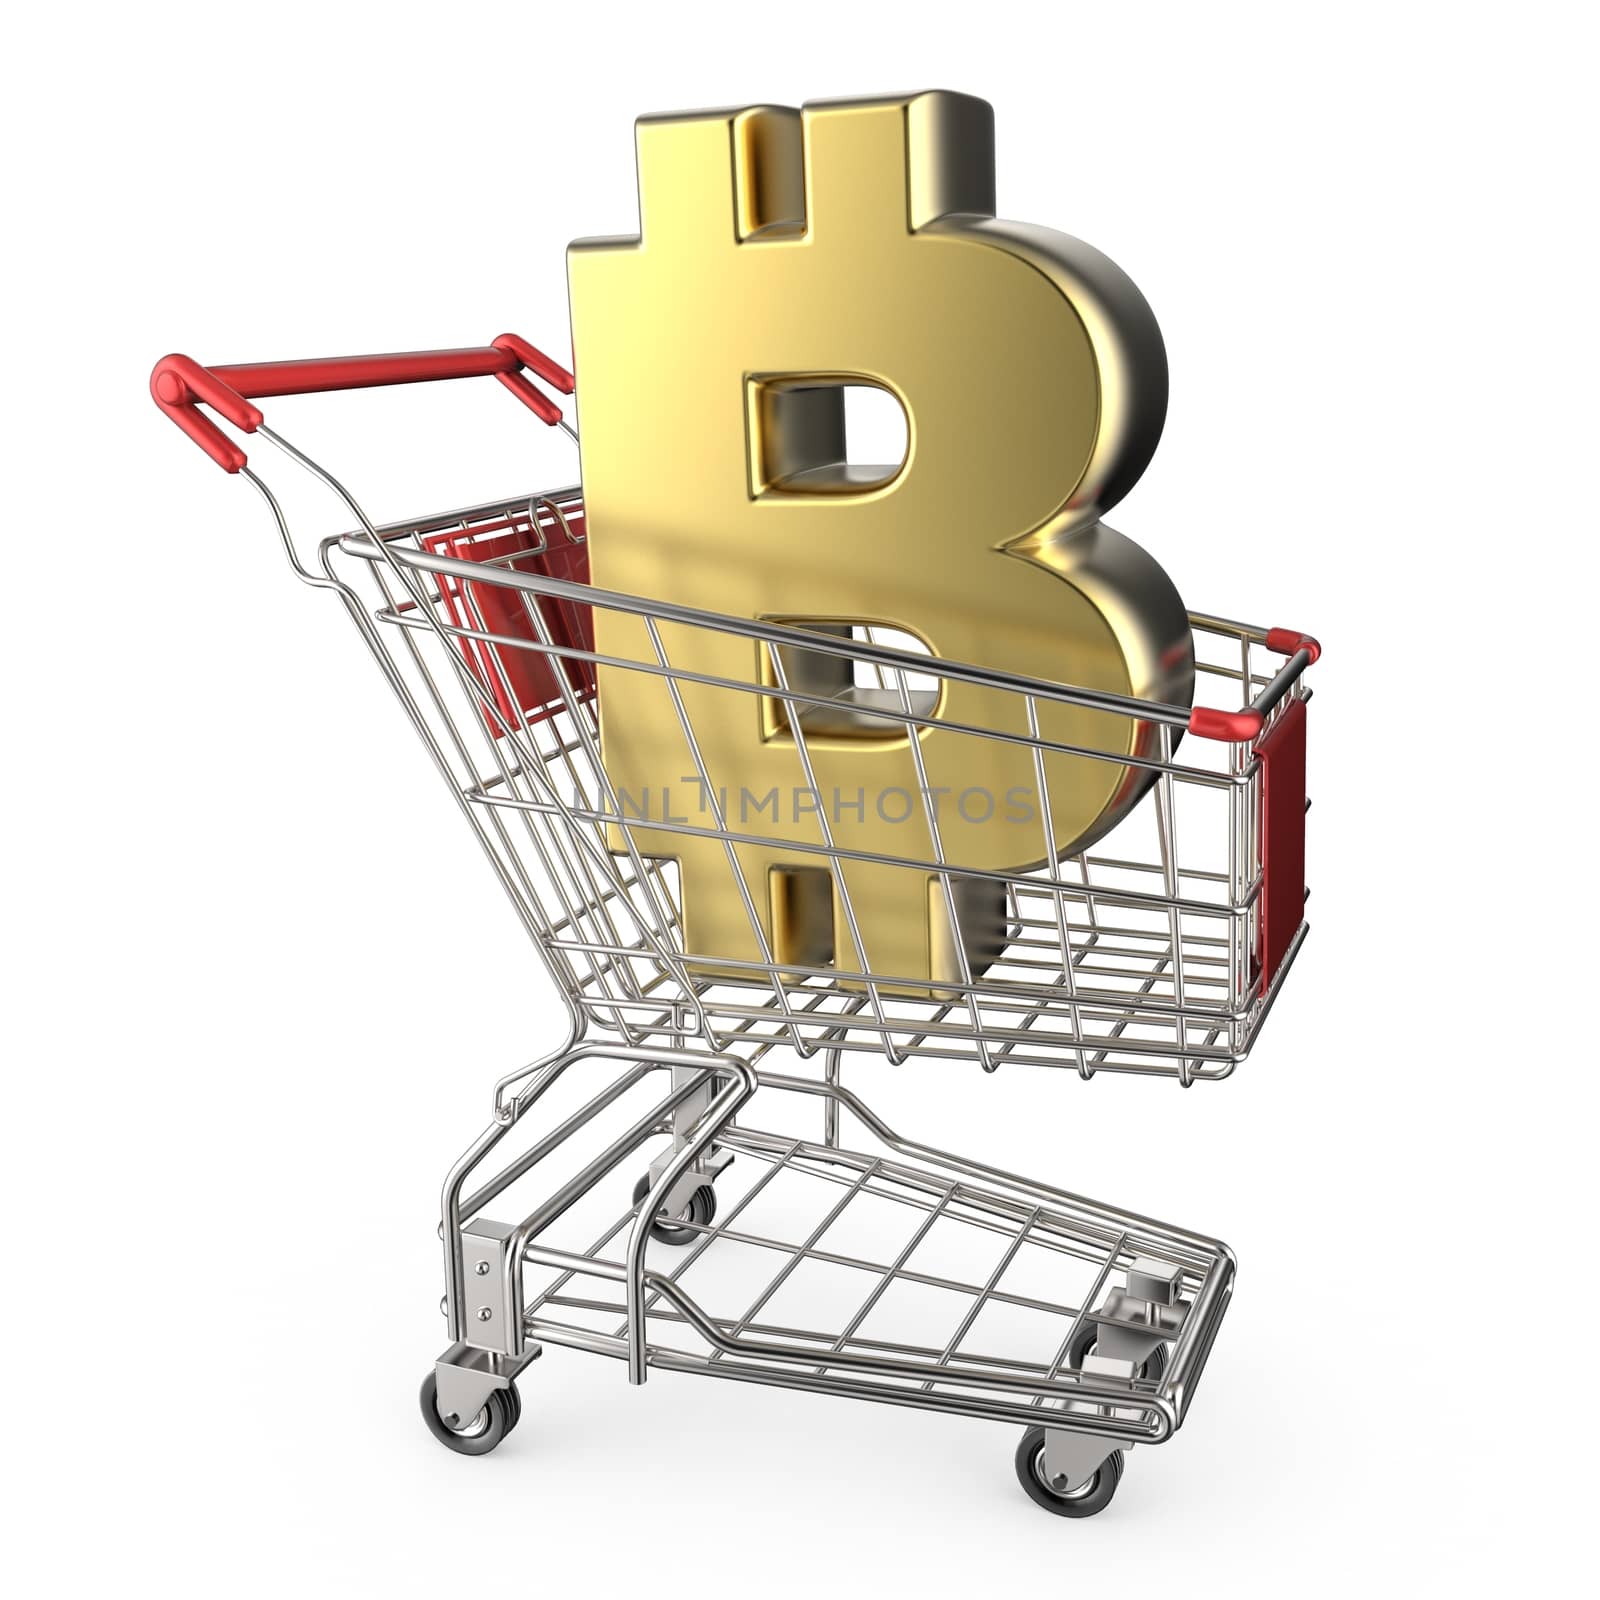 Red shopping cart with golden bitcoin currency sign 3D render illustration isolated on white background